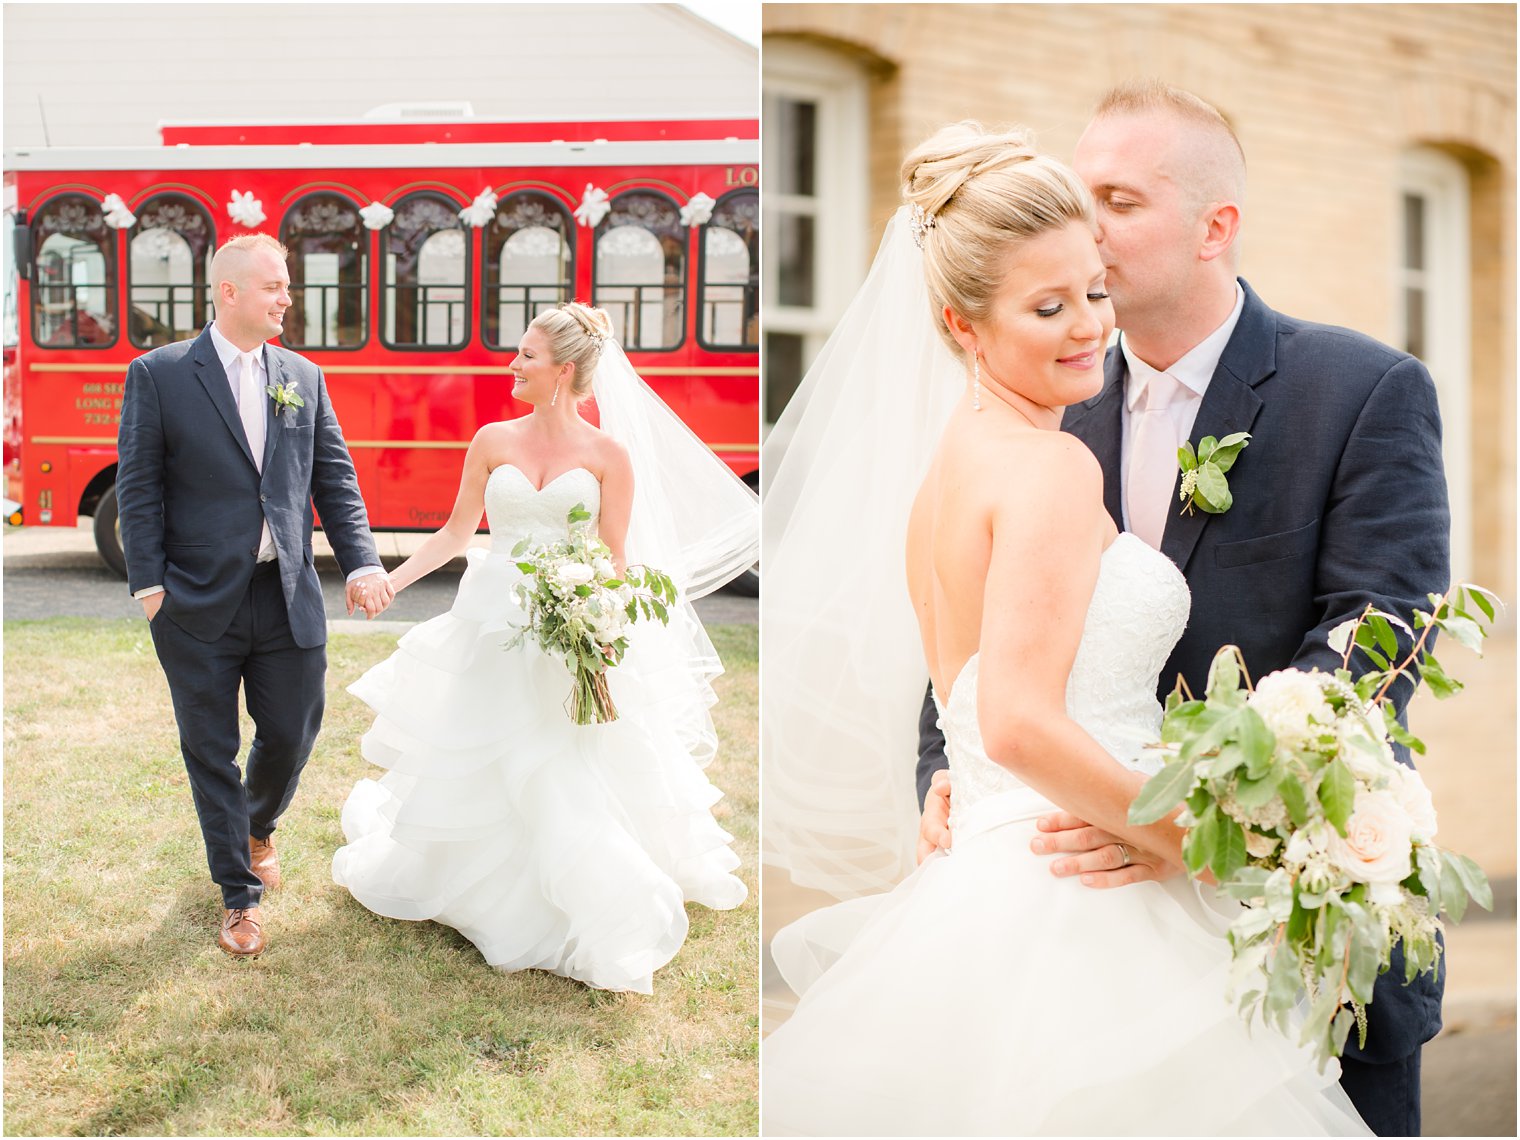 Bride and groom in front of Long Branch Trolley